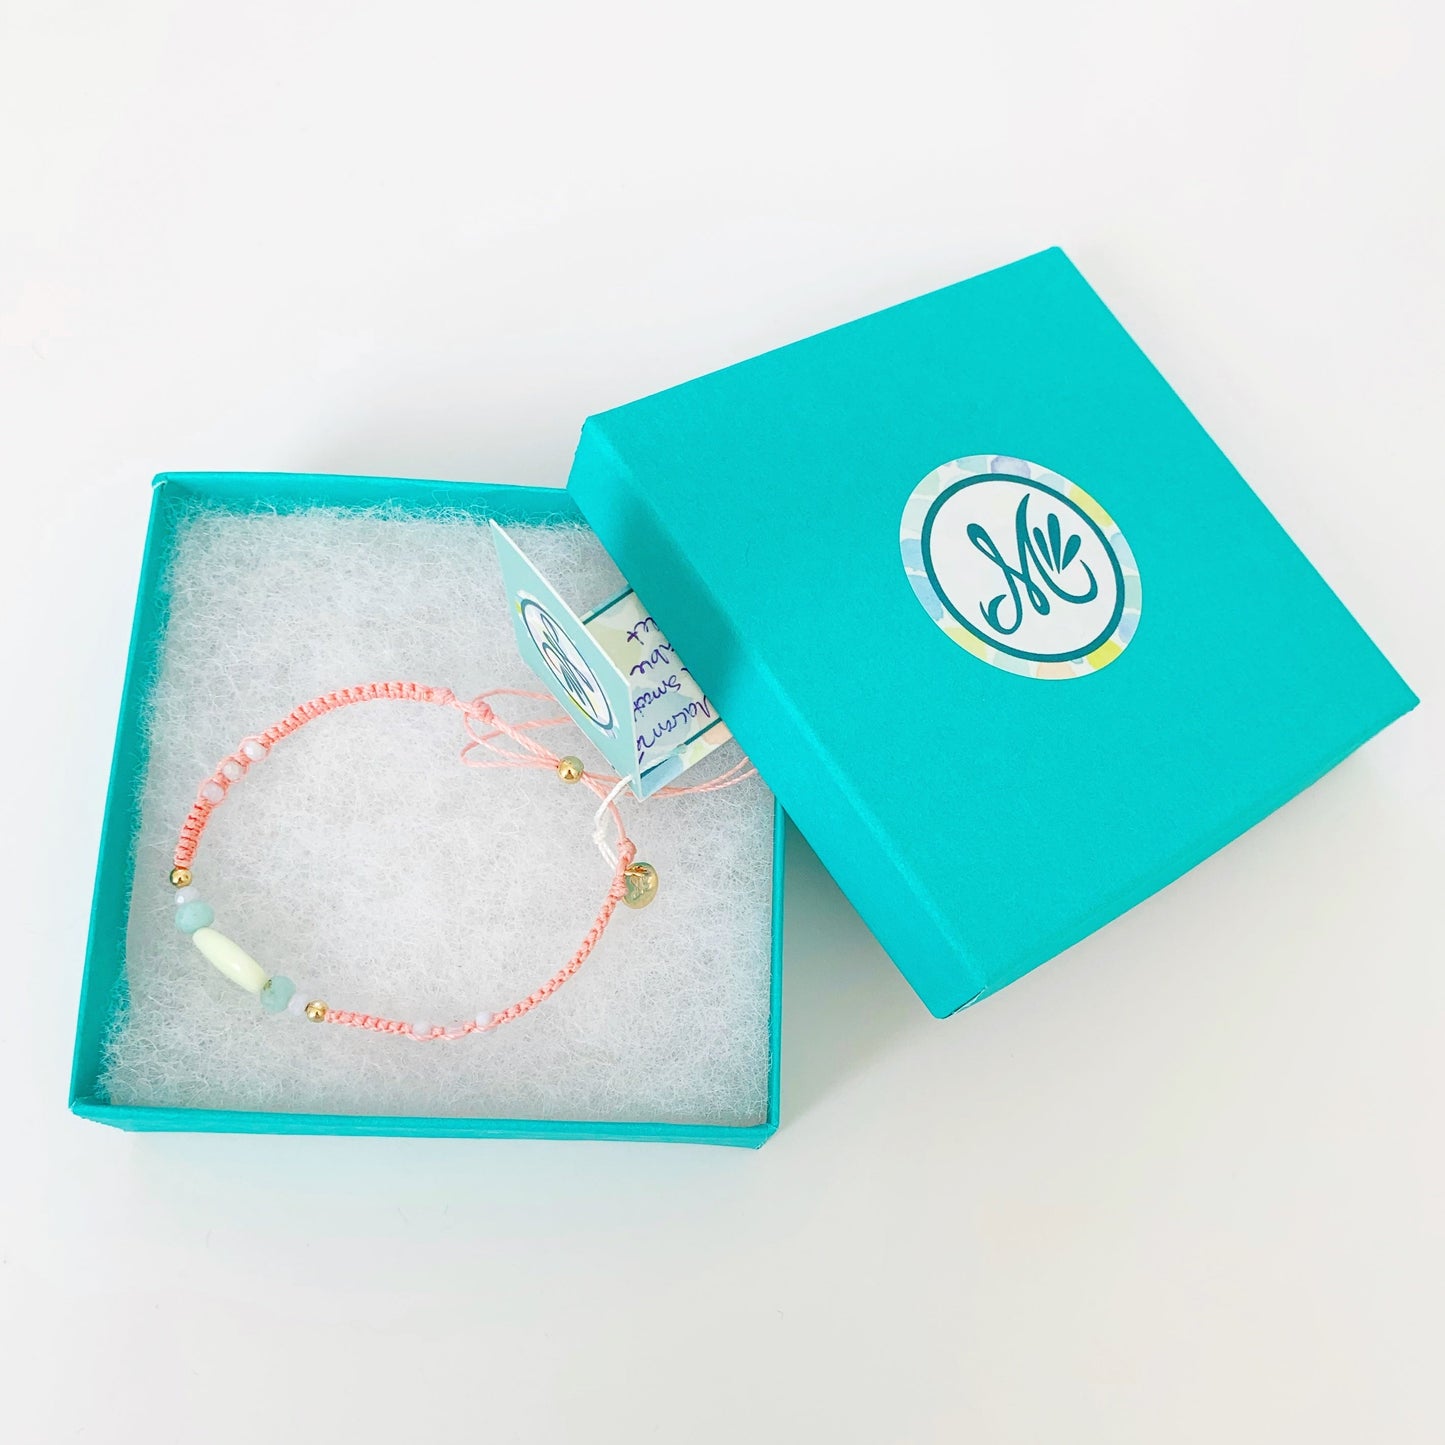 peach macrame friendship bracelet pictured in a teal mermaids and madeleines gift box on a white background